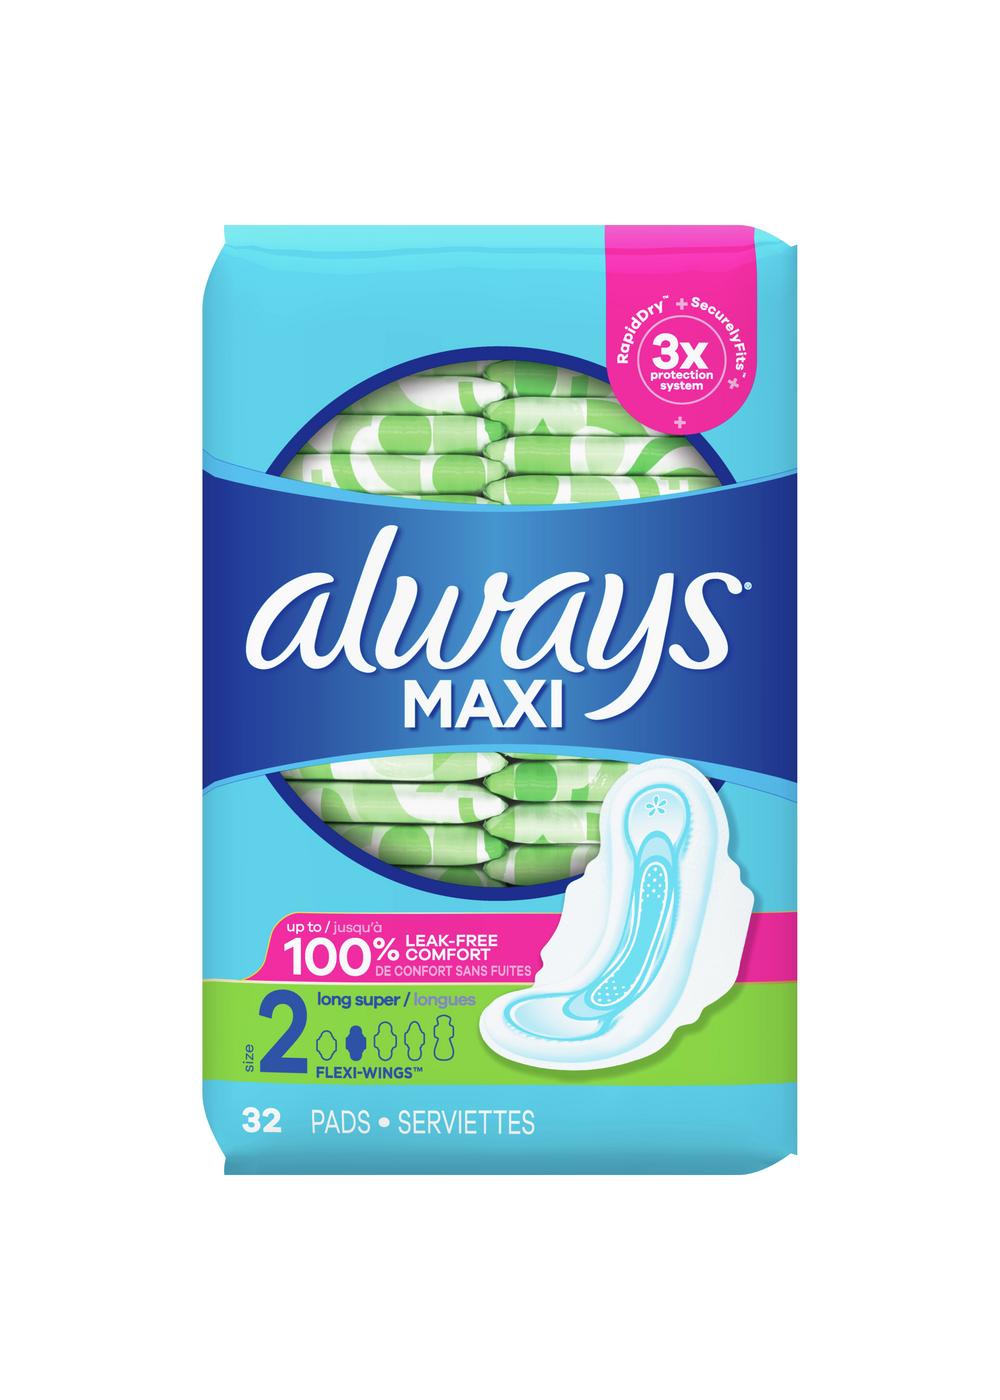 H-E-B Maxi with Flexi-Wings Overnight Pads - Extra Heavy - Shop Pads &  Liners at H-E-B